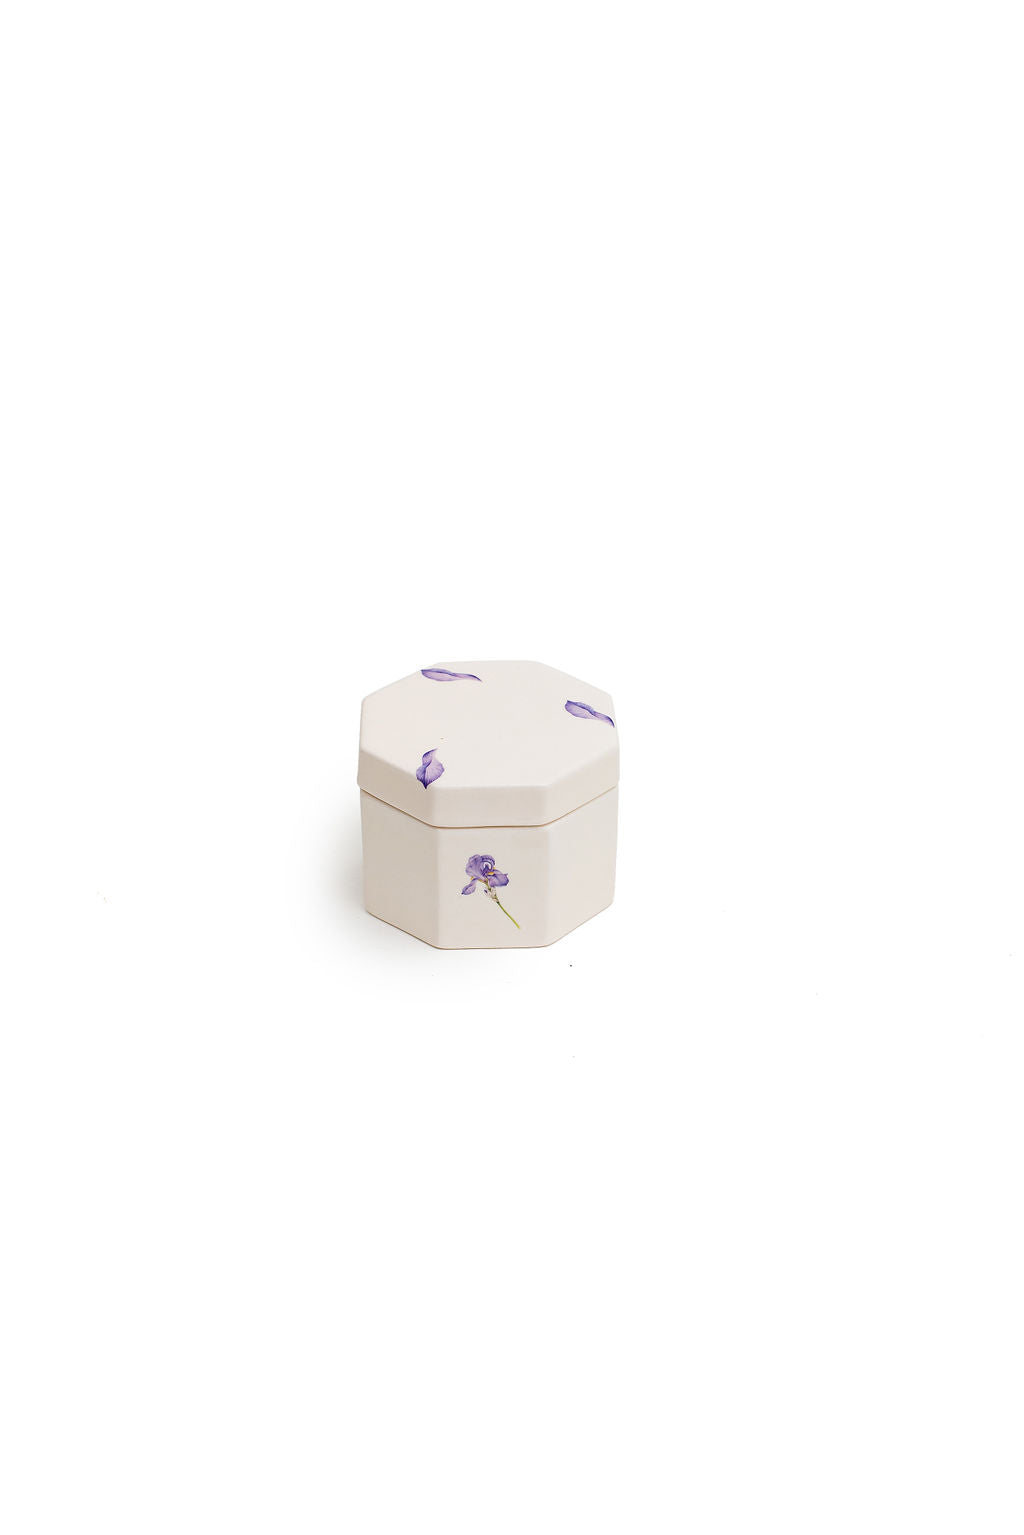 octagon Iris canister white and purple